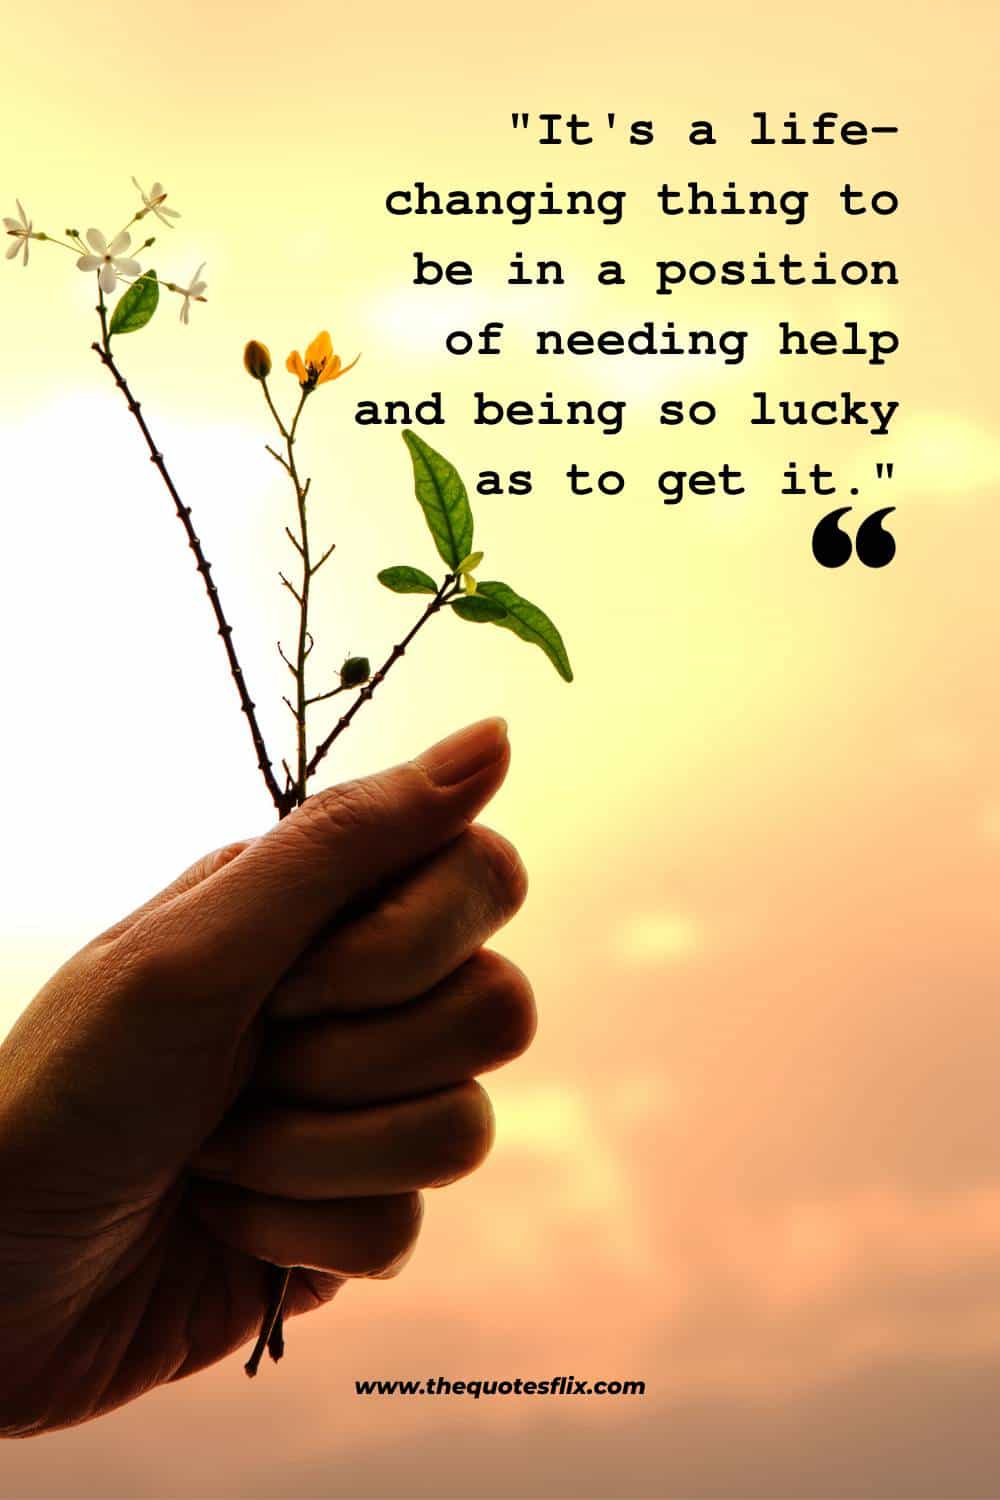 inspirational cancer quotes - life changing position being lucky